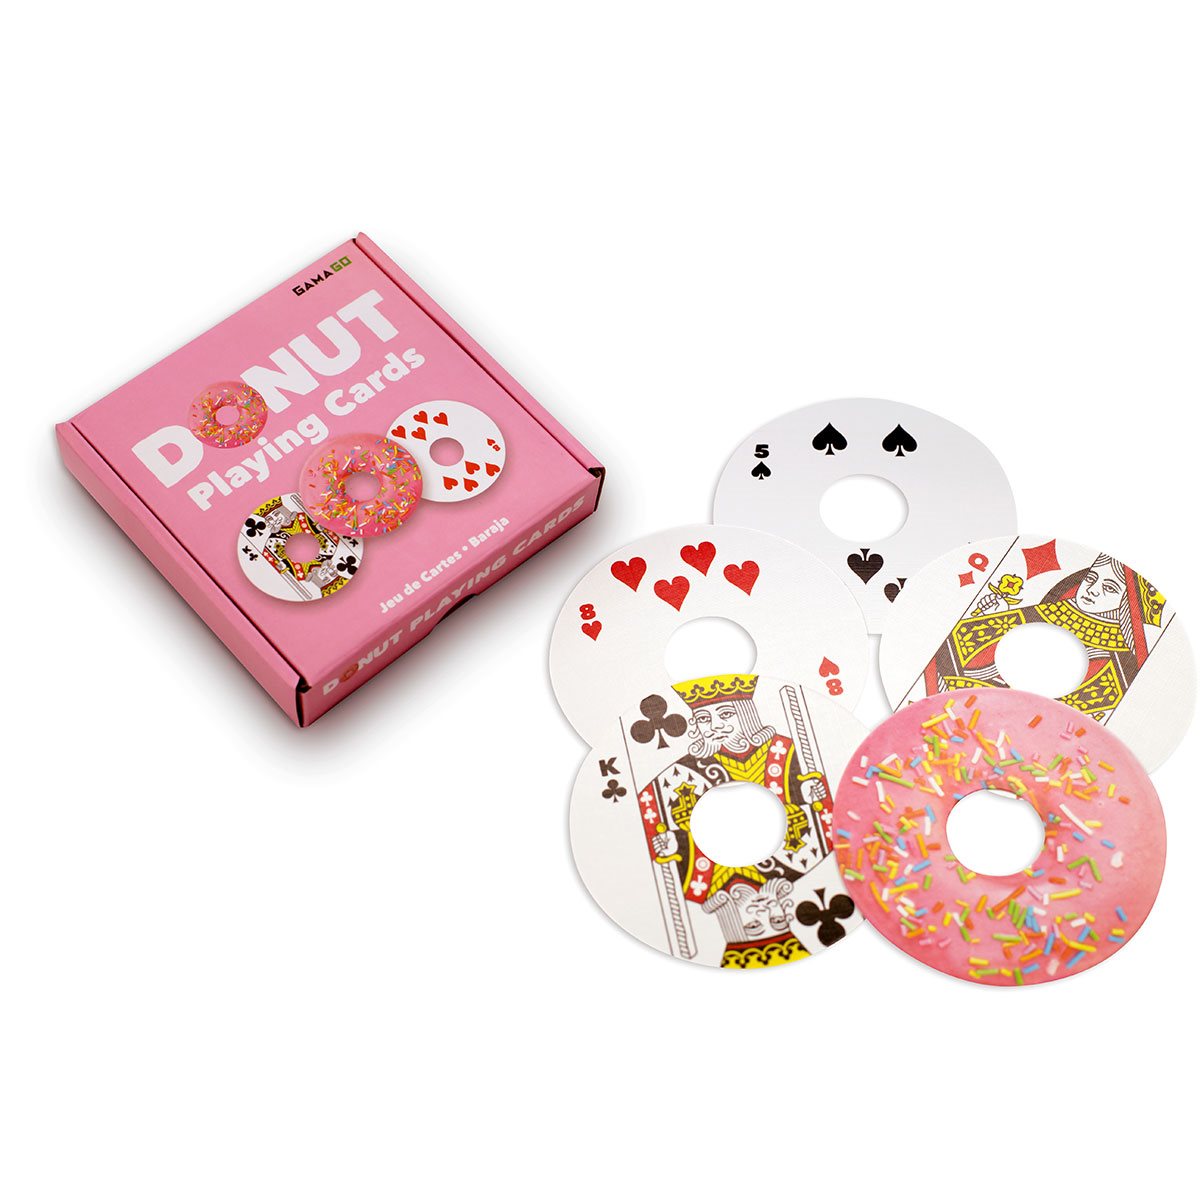 Doughnut Donut-shaped Playing Cards by GAMAGO 52 Card Standard Deck 2 Jokers for sale online 